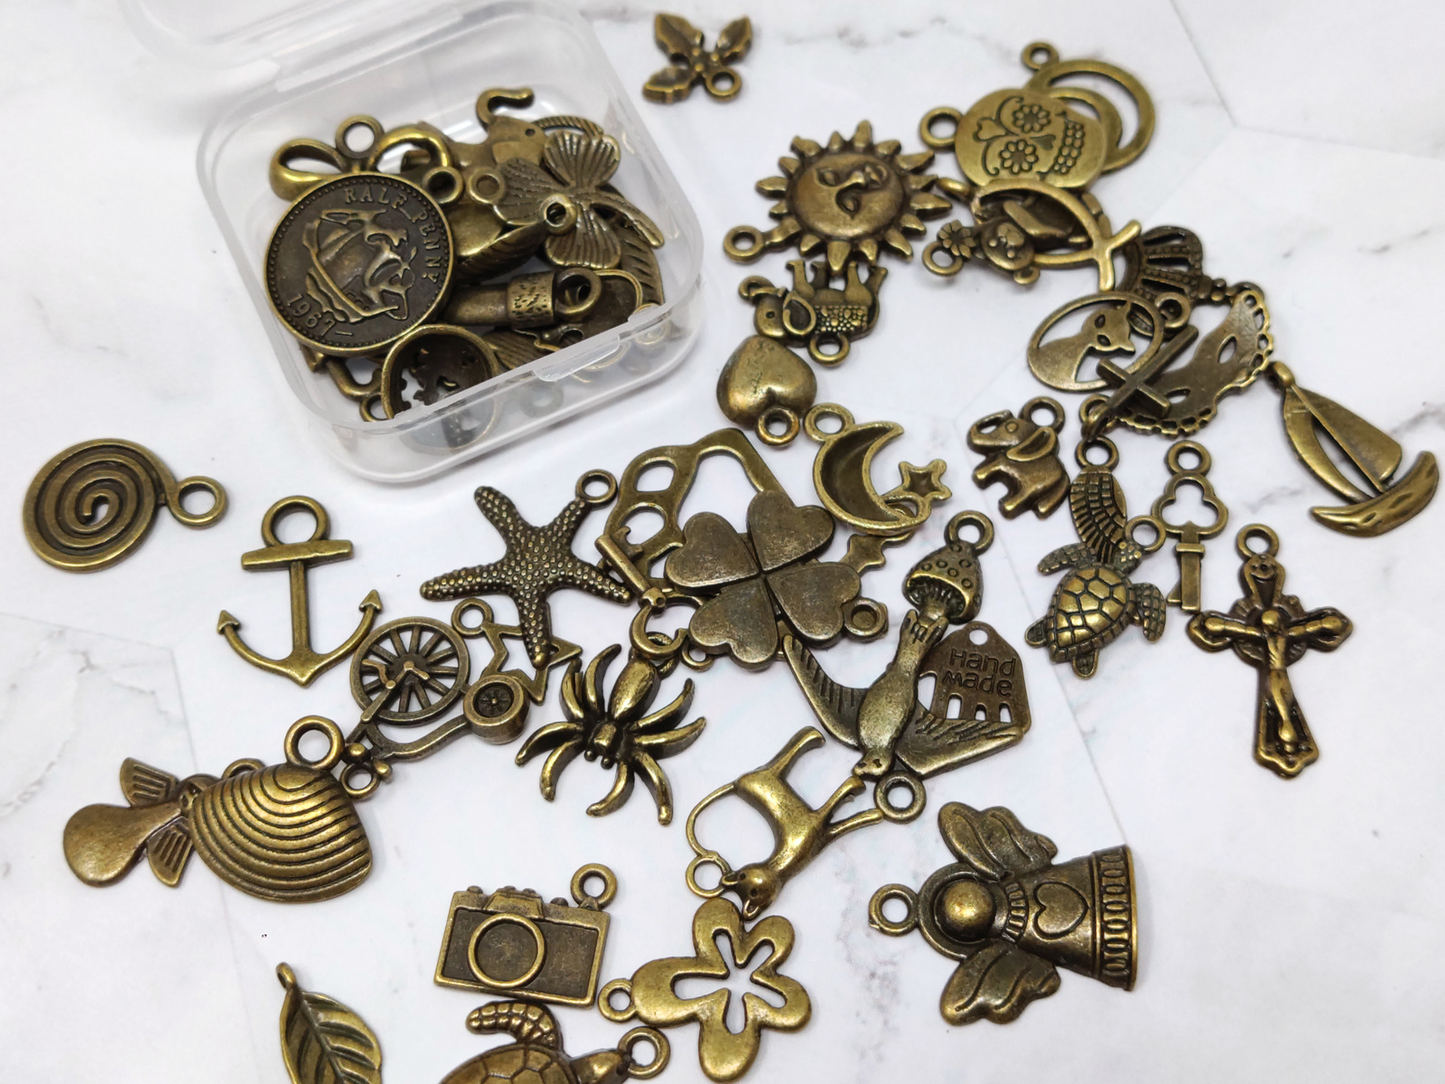 20 pcs Bulk Alloy Charms for Bracelet or Necklace Pendant for Jewelry Making Supplies